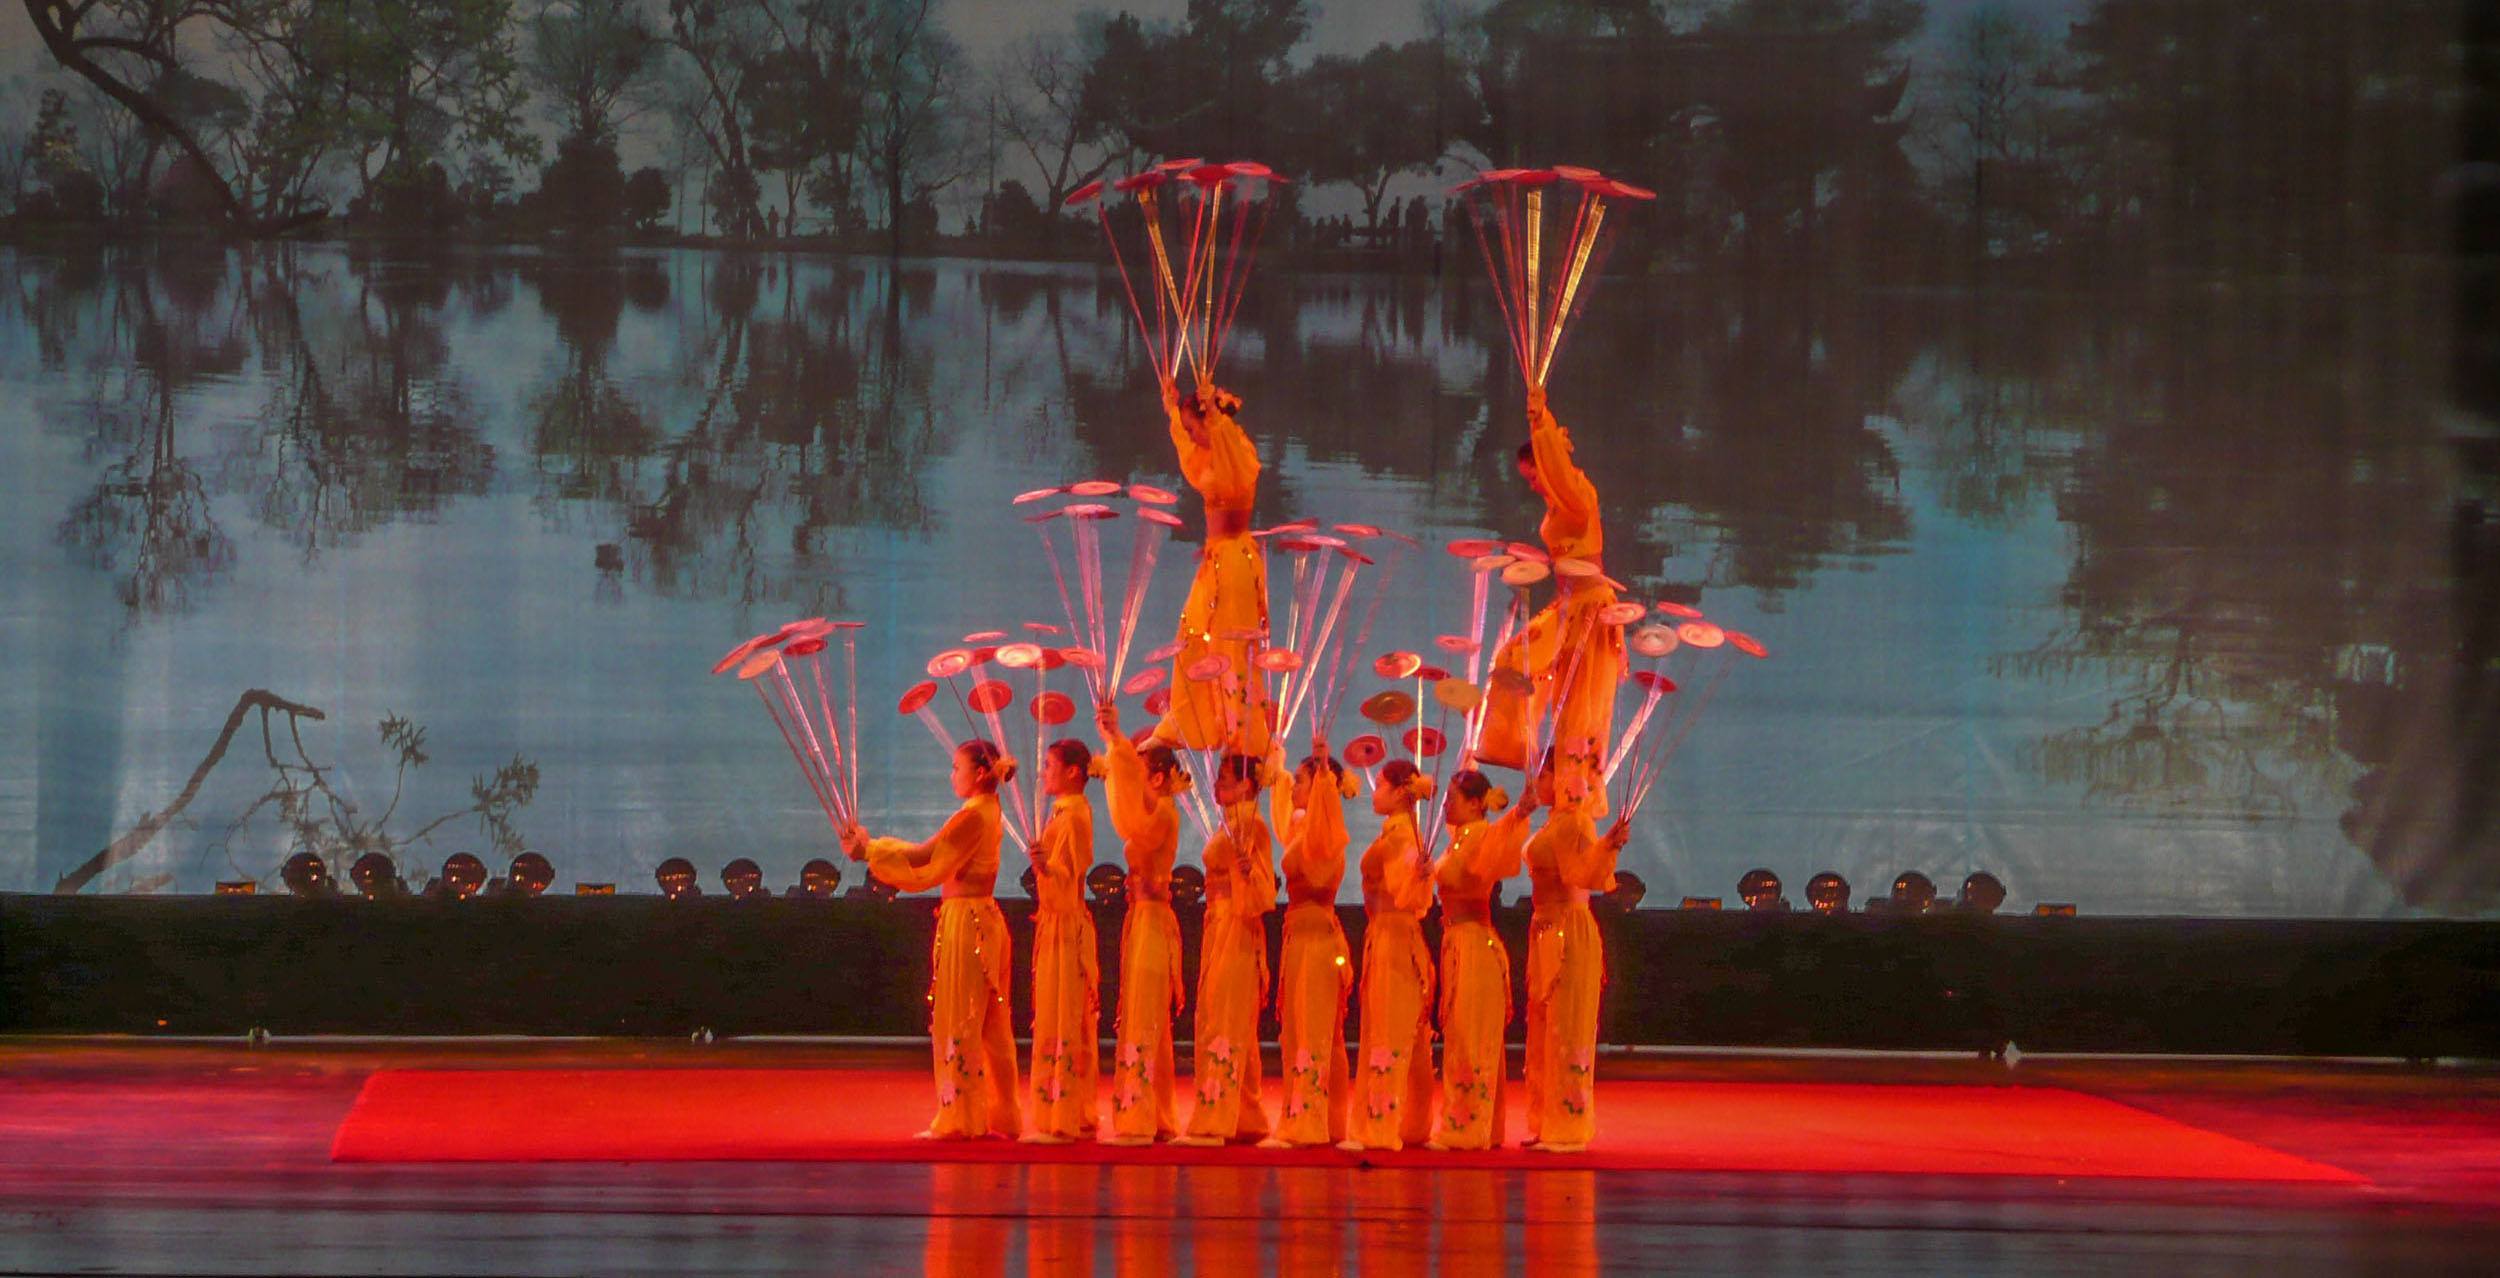 Acrobats performing at the Shanghai Centre Theatre in Shanghai China